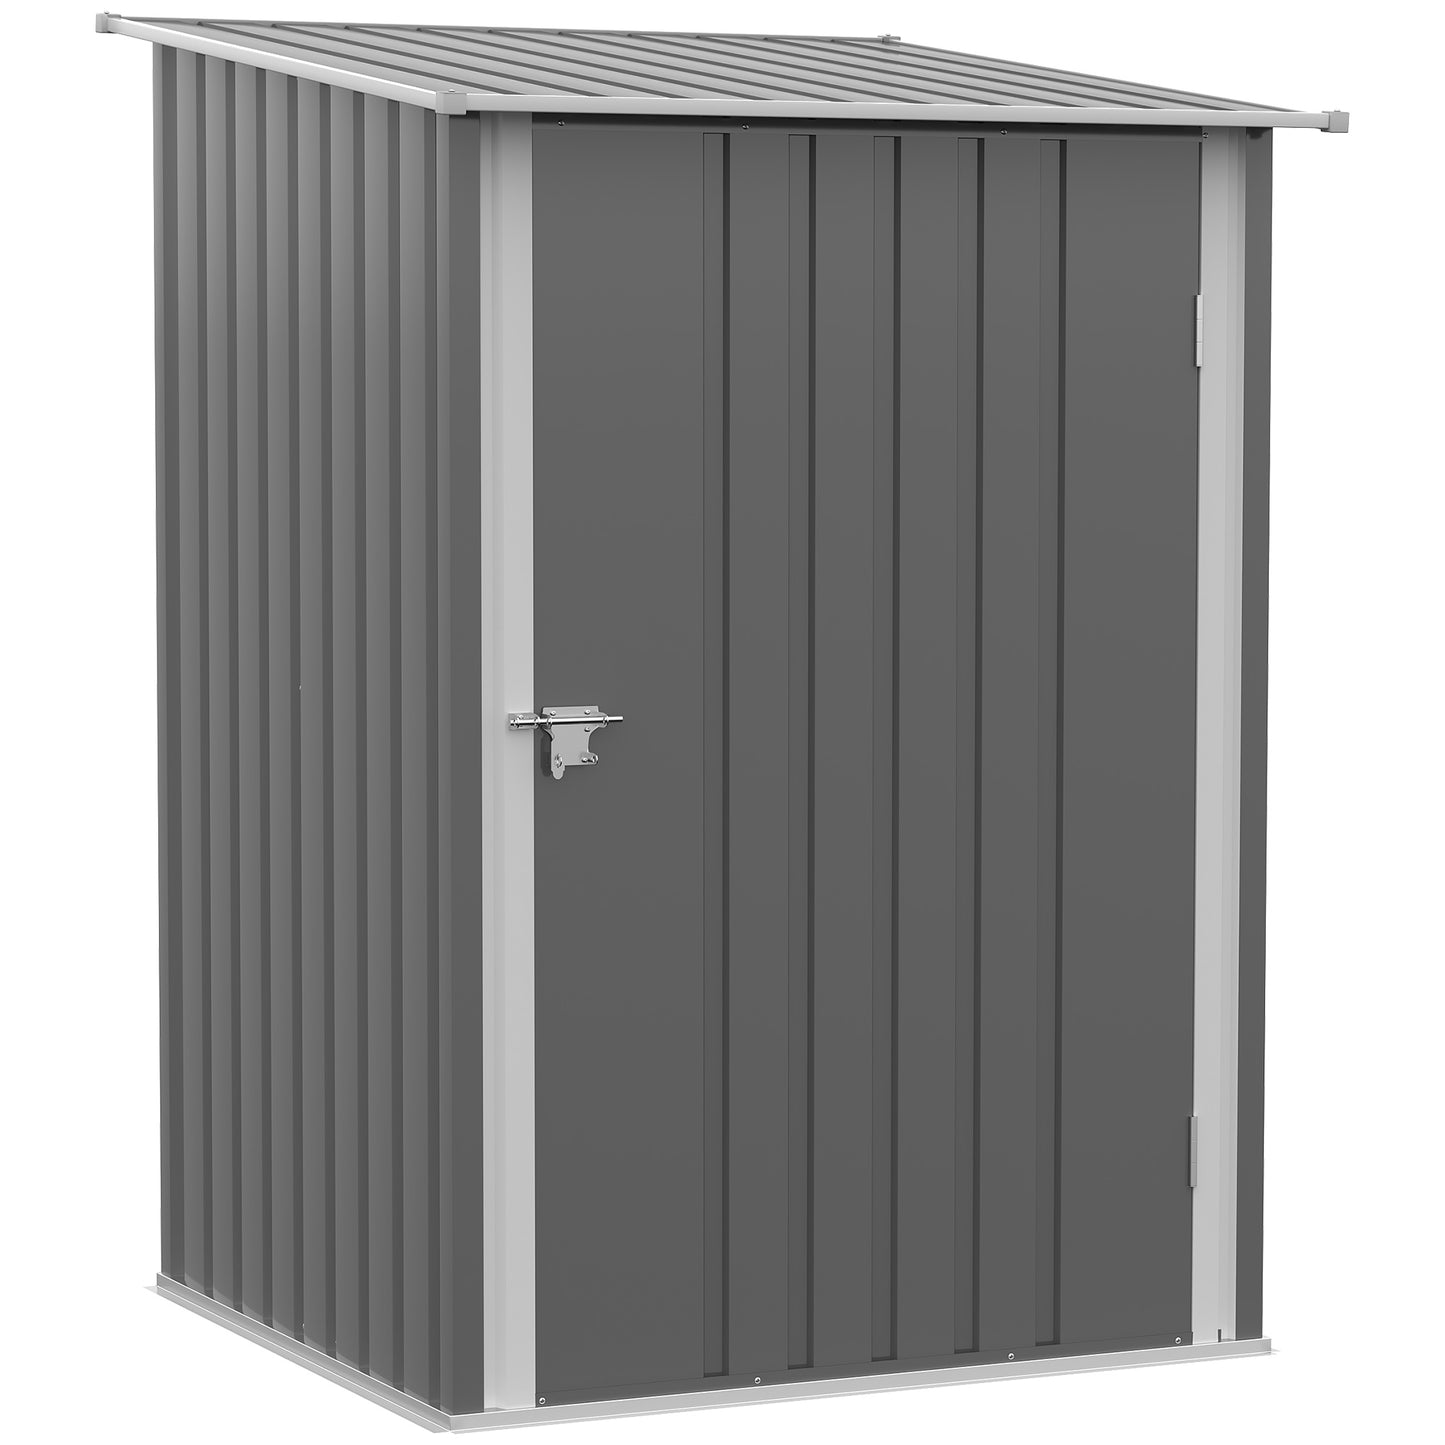 Outsunny 3.3' x 3.4' Lean-to Garden Storage Shed, Outdoor Galvanized Steel Tool House with Lockable Door for Patio Gray